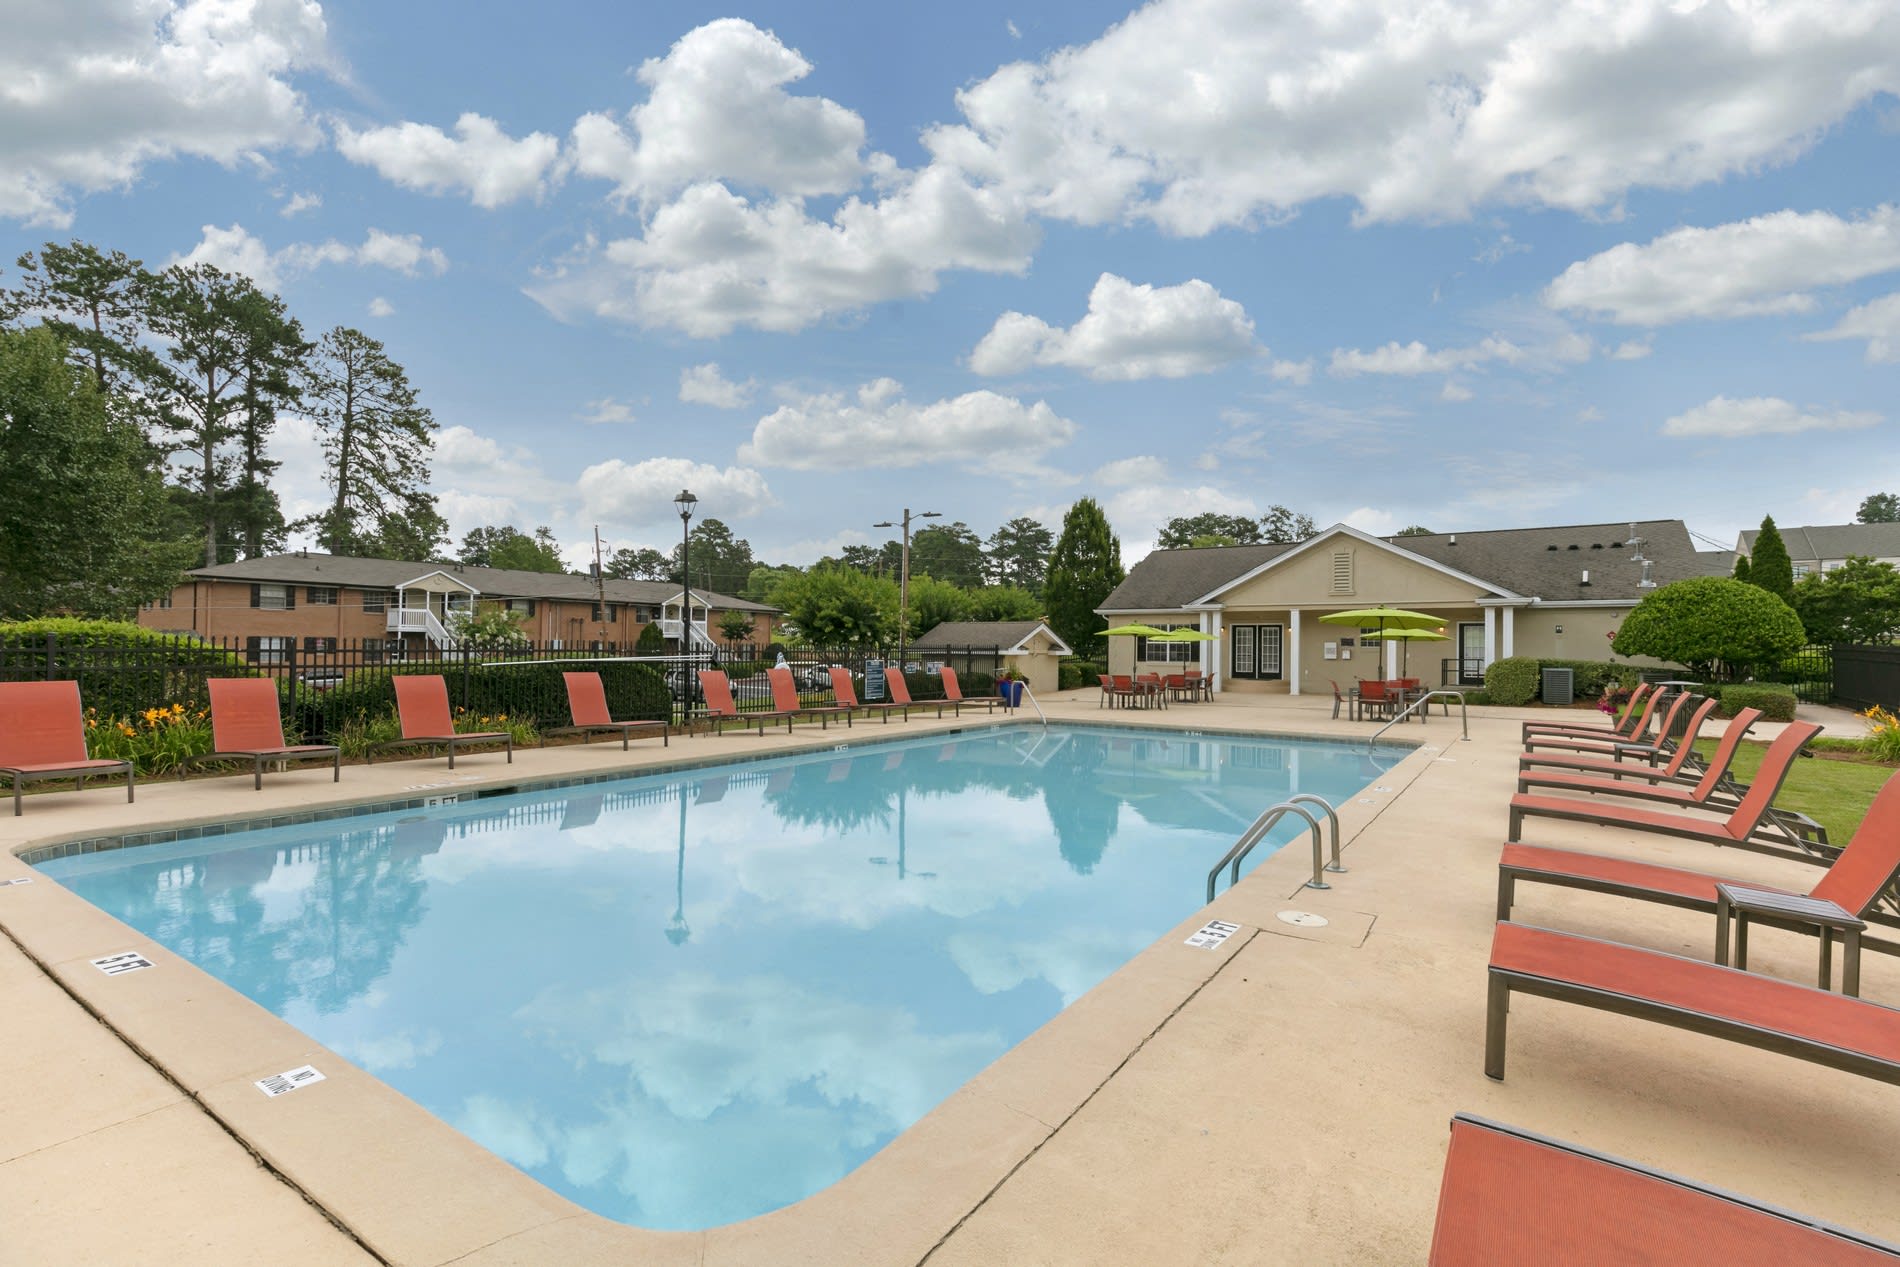 Sparkling pool and patio at Galleria Courtyards in Smyrna, Georgia